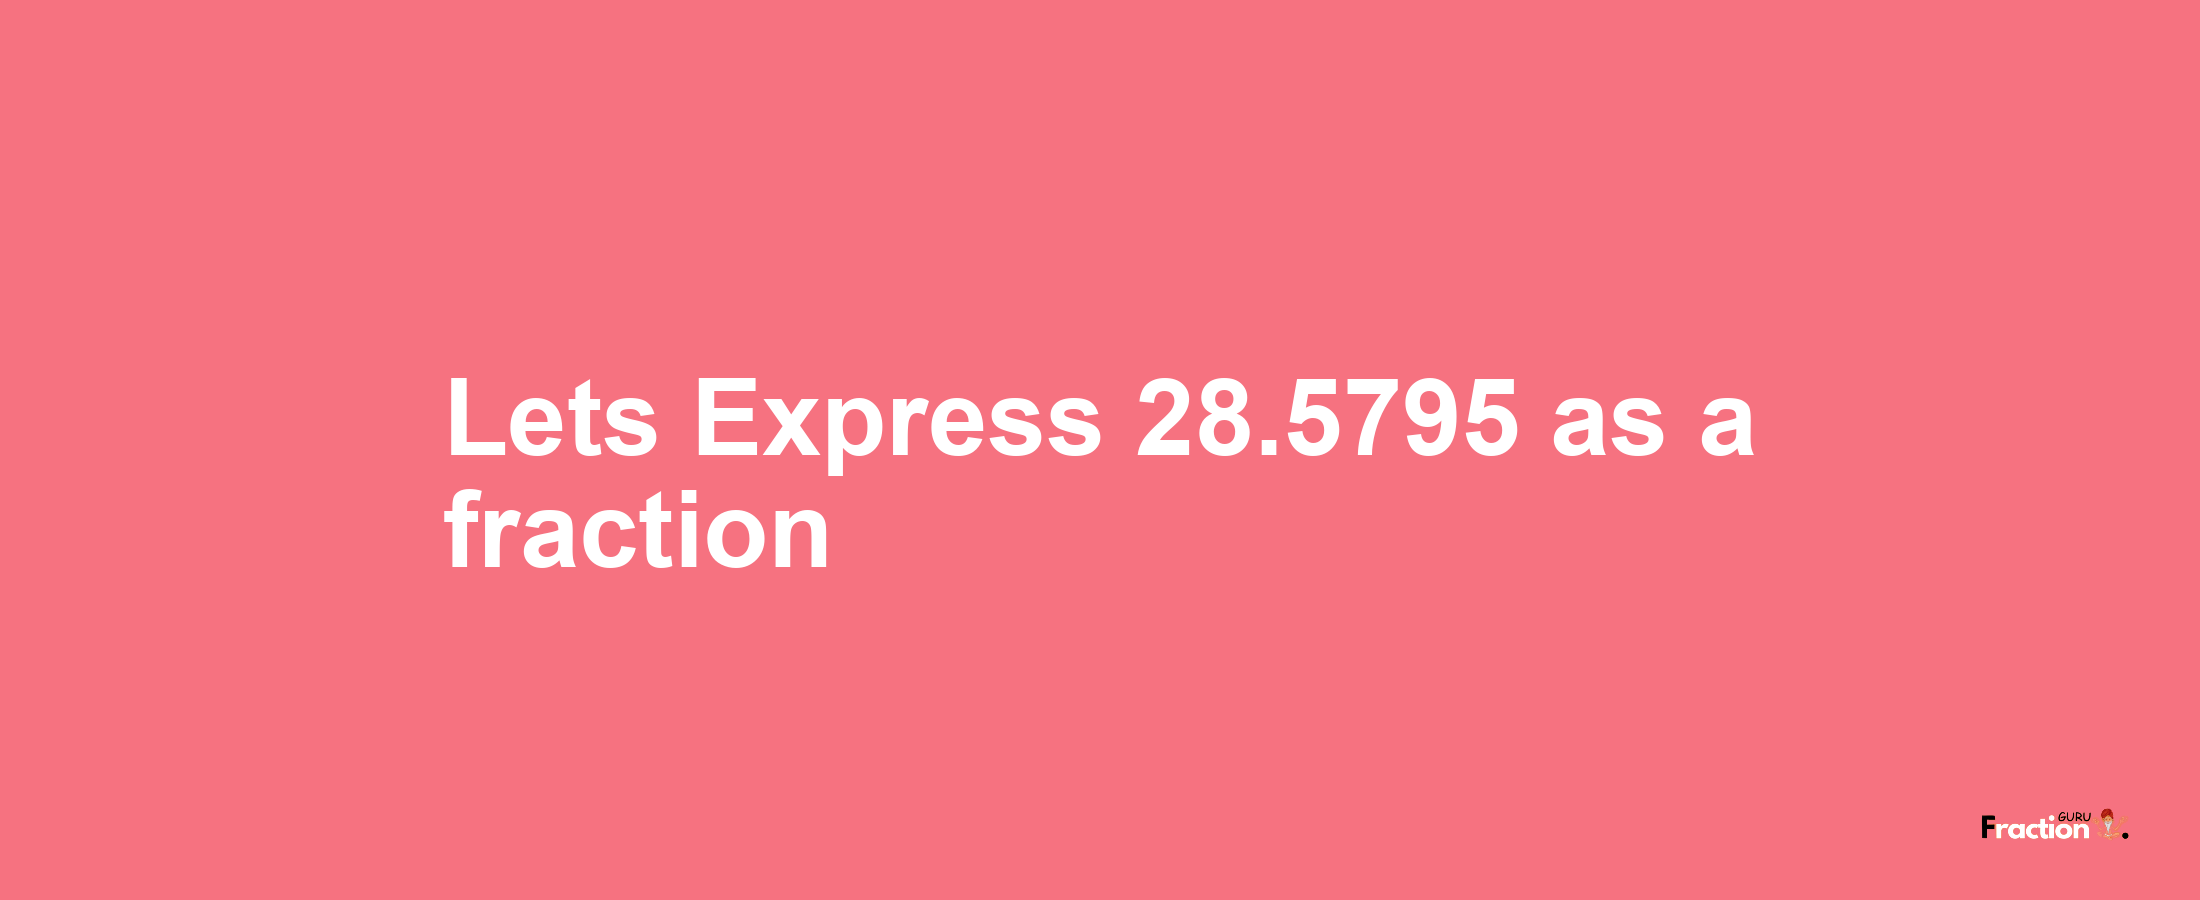 Lets Express 28.5795 as afraction